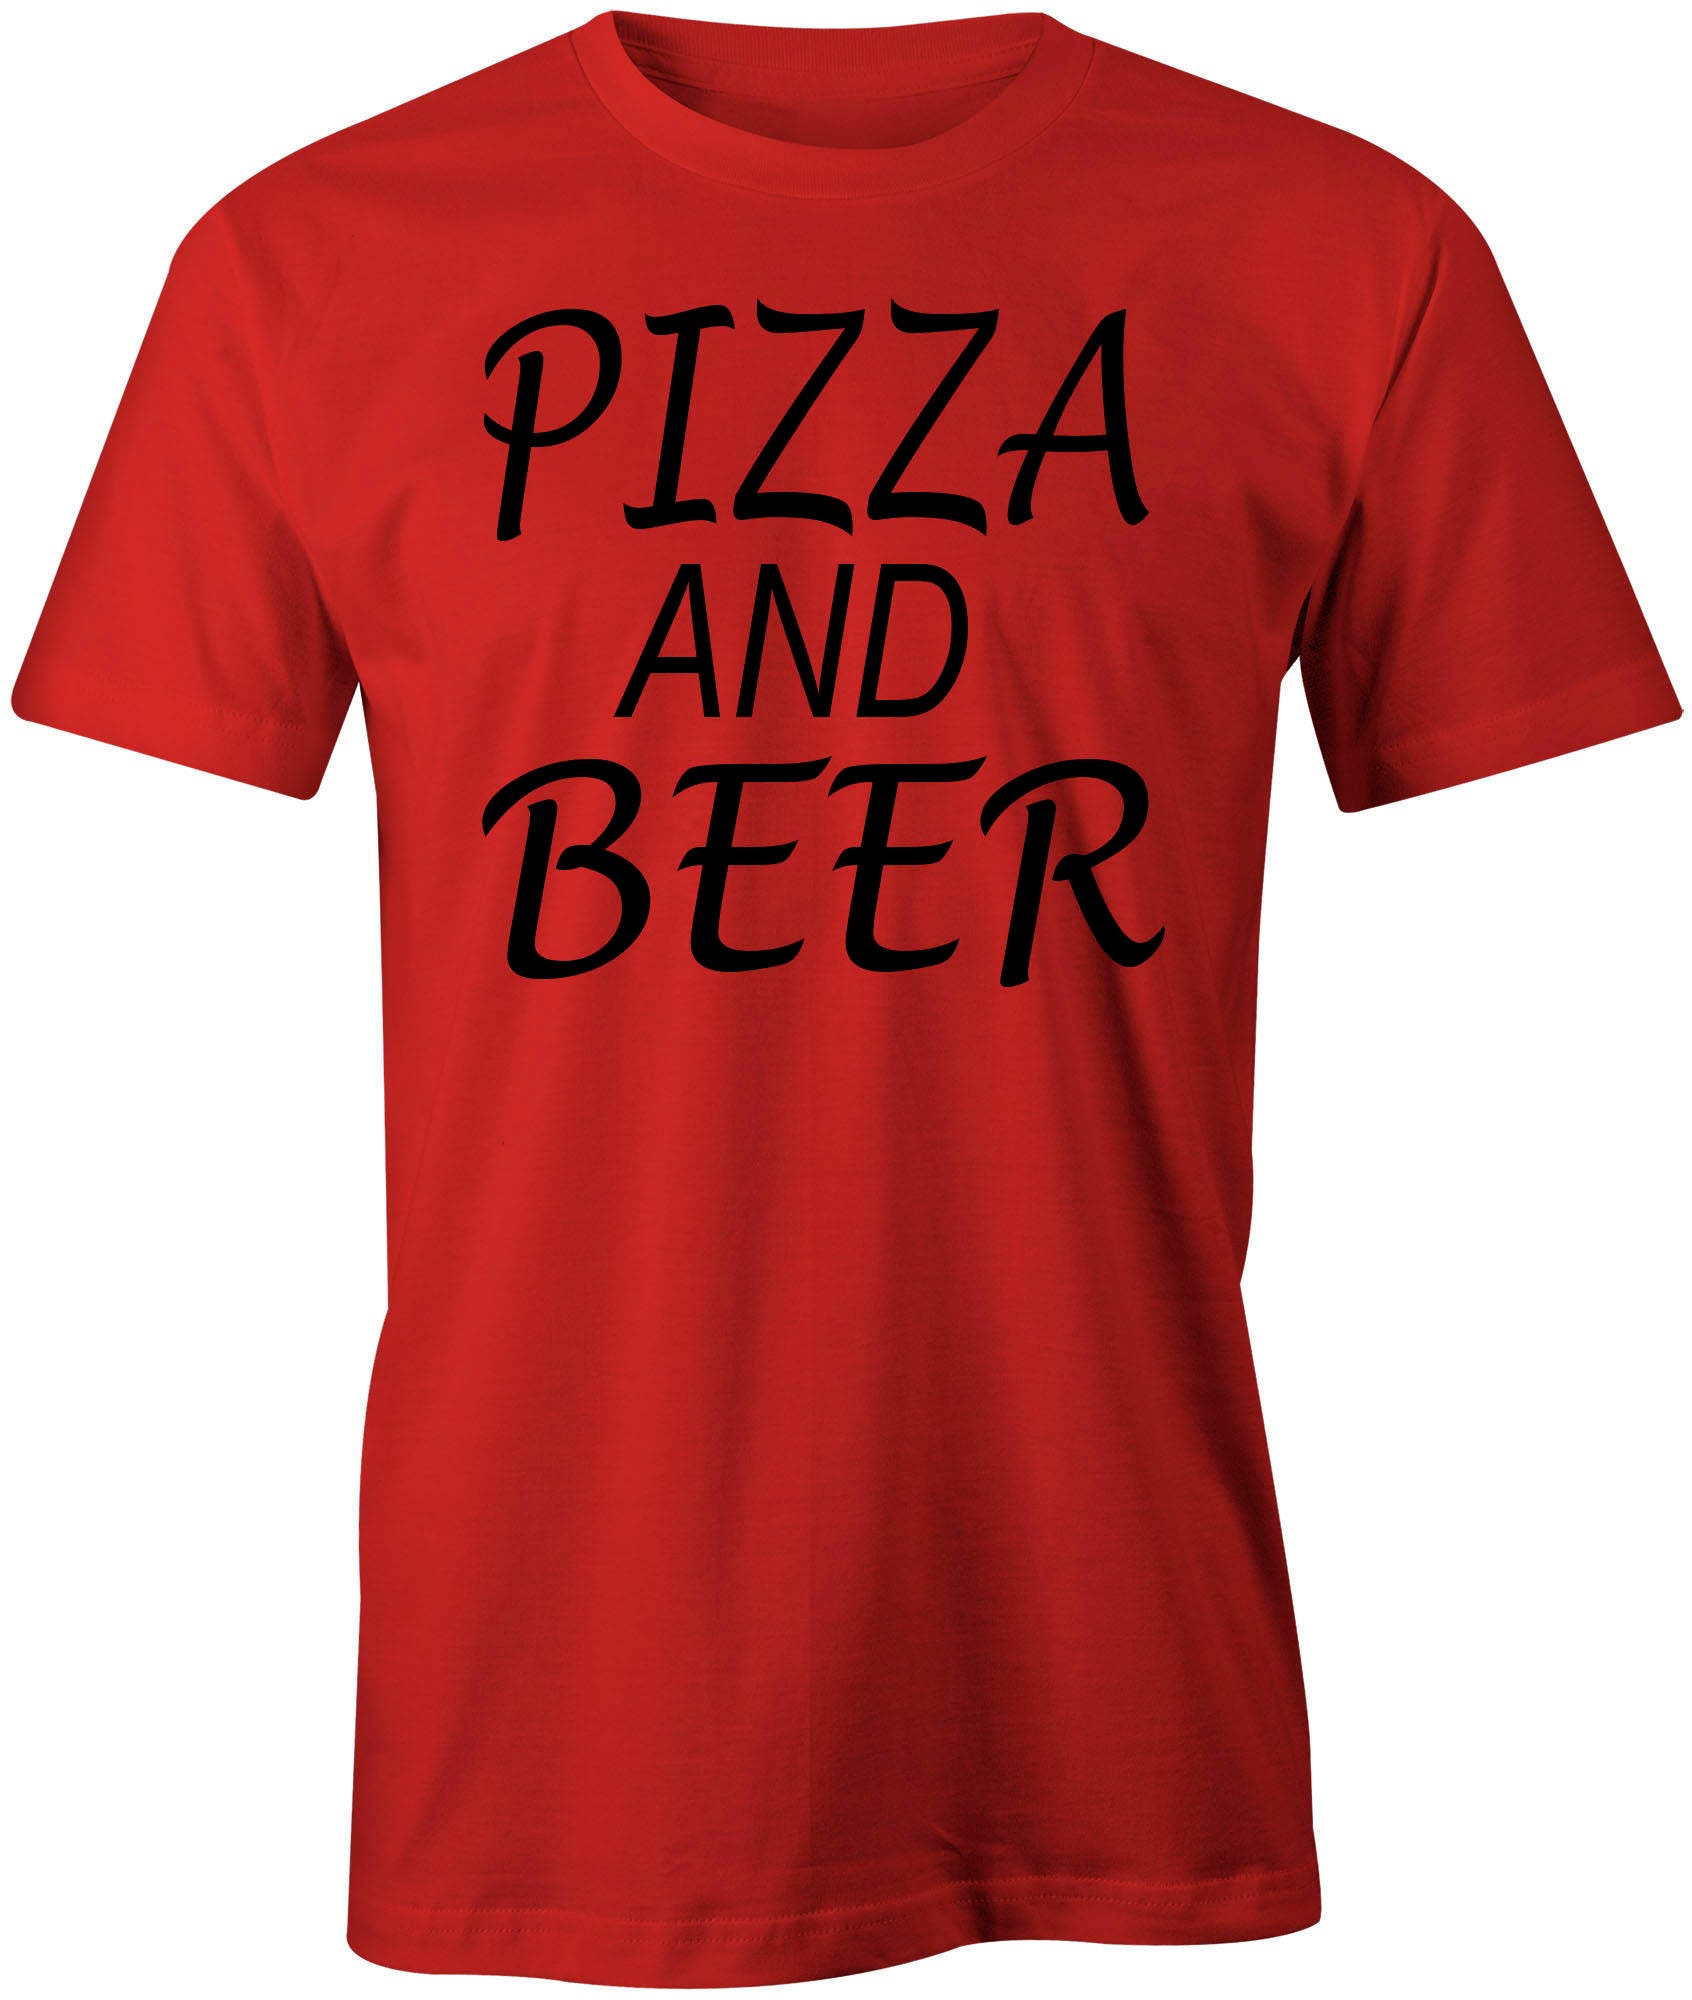 Men's Pizza and Beer T-shirts-tees-pizza Funny Shirts-cool - Etsy